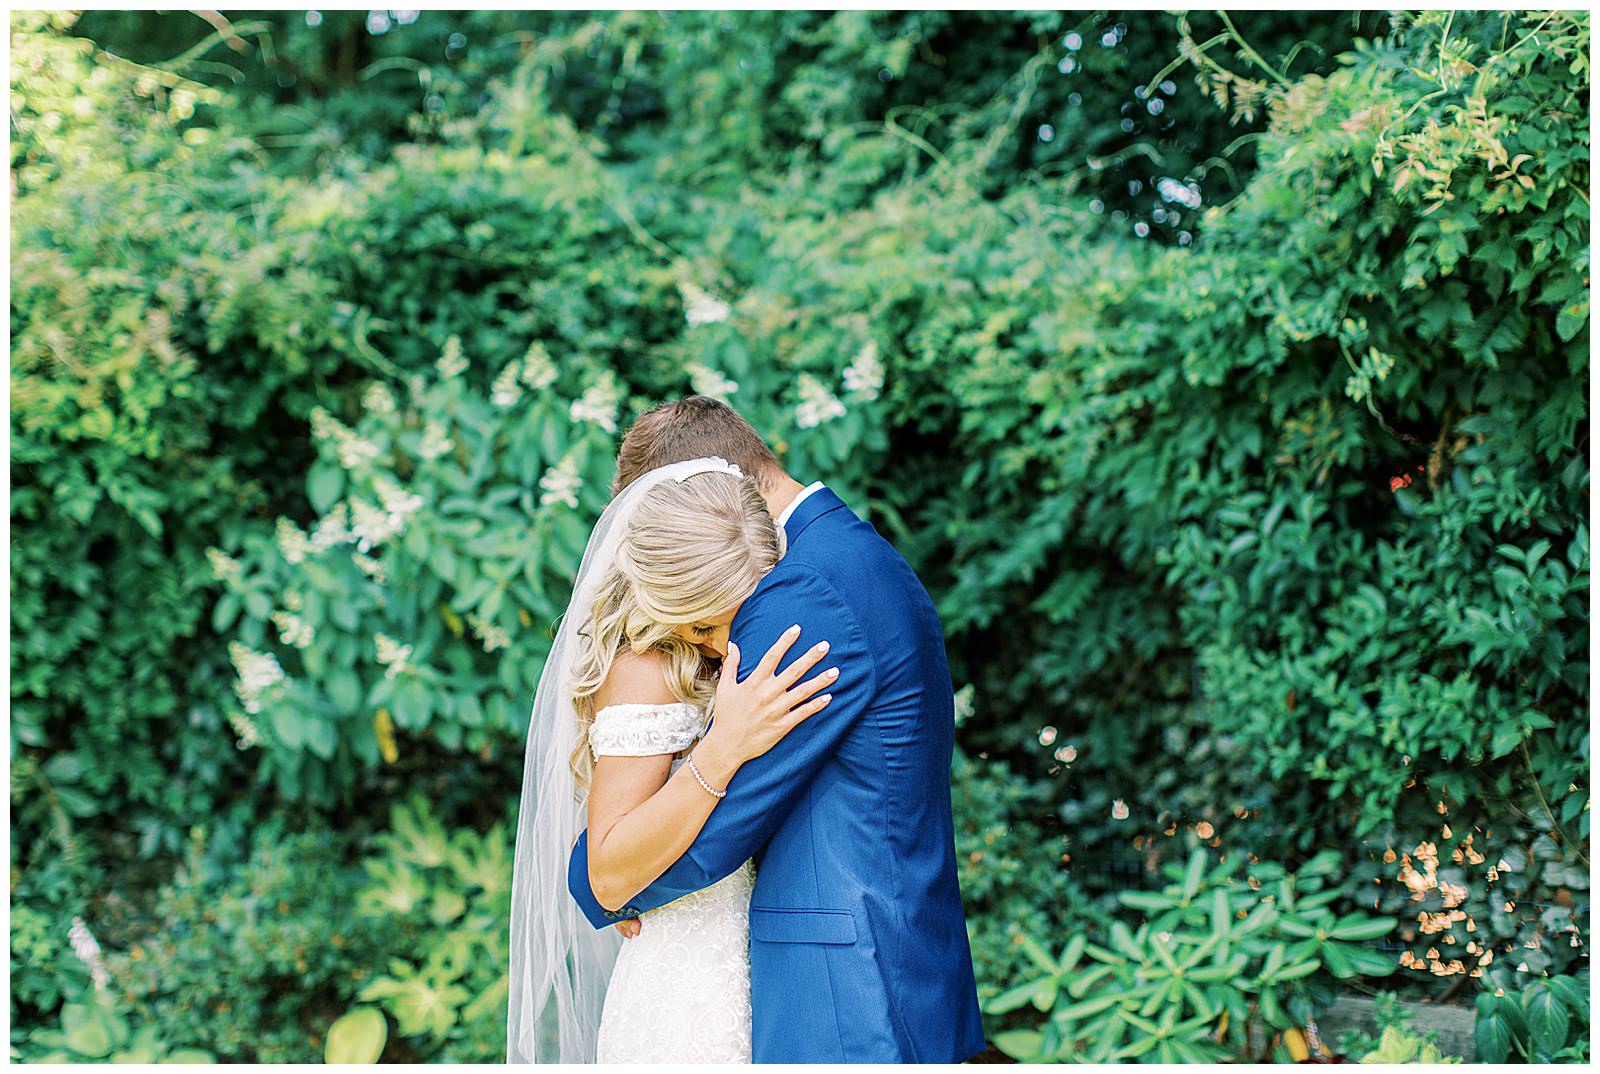 royal blue suited groom and blonde haired bride emotional first look outdoor in garden